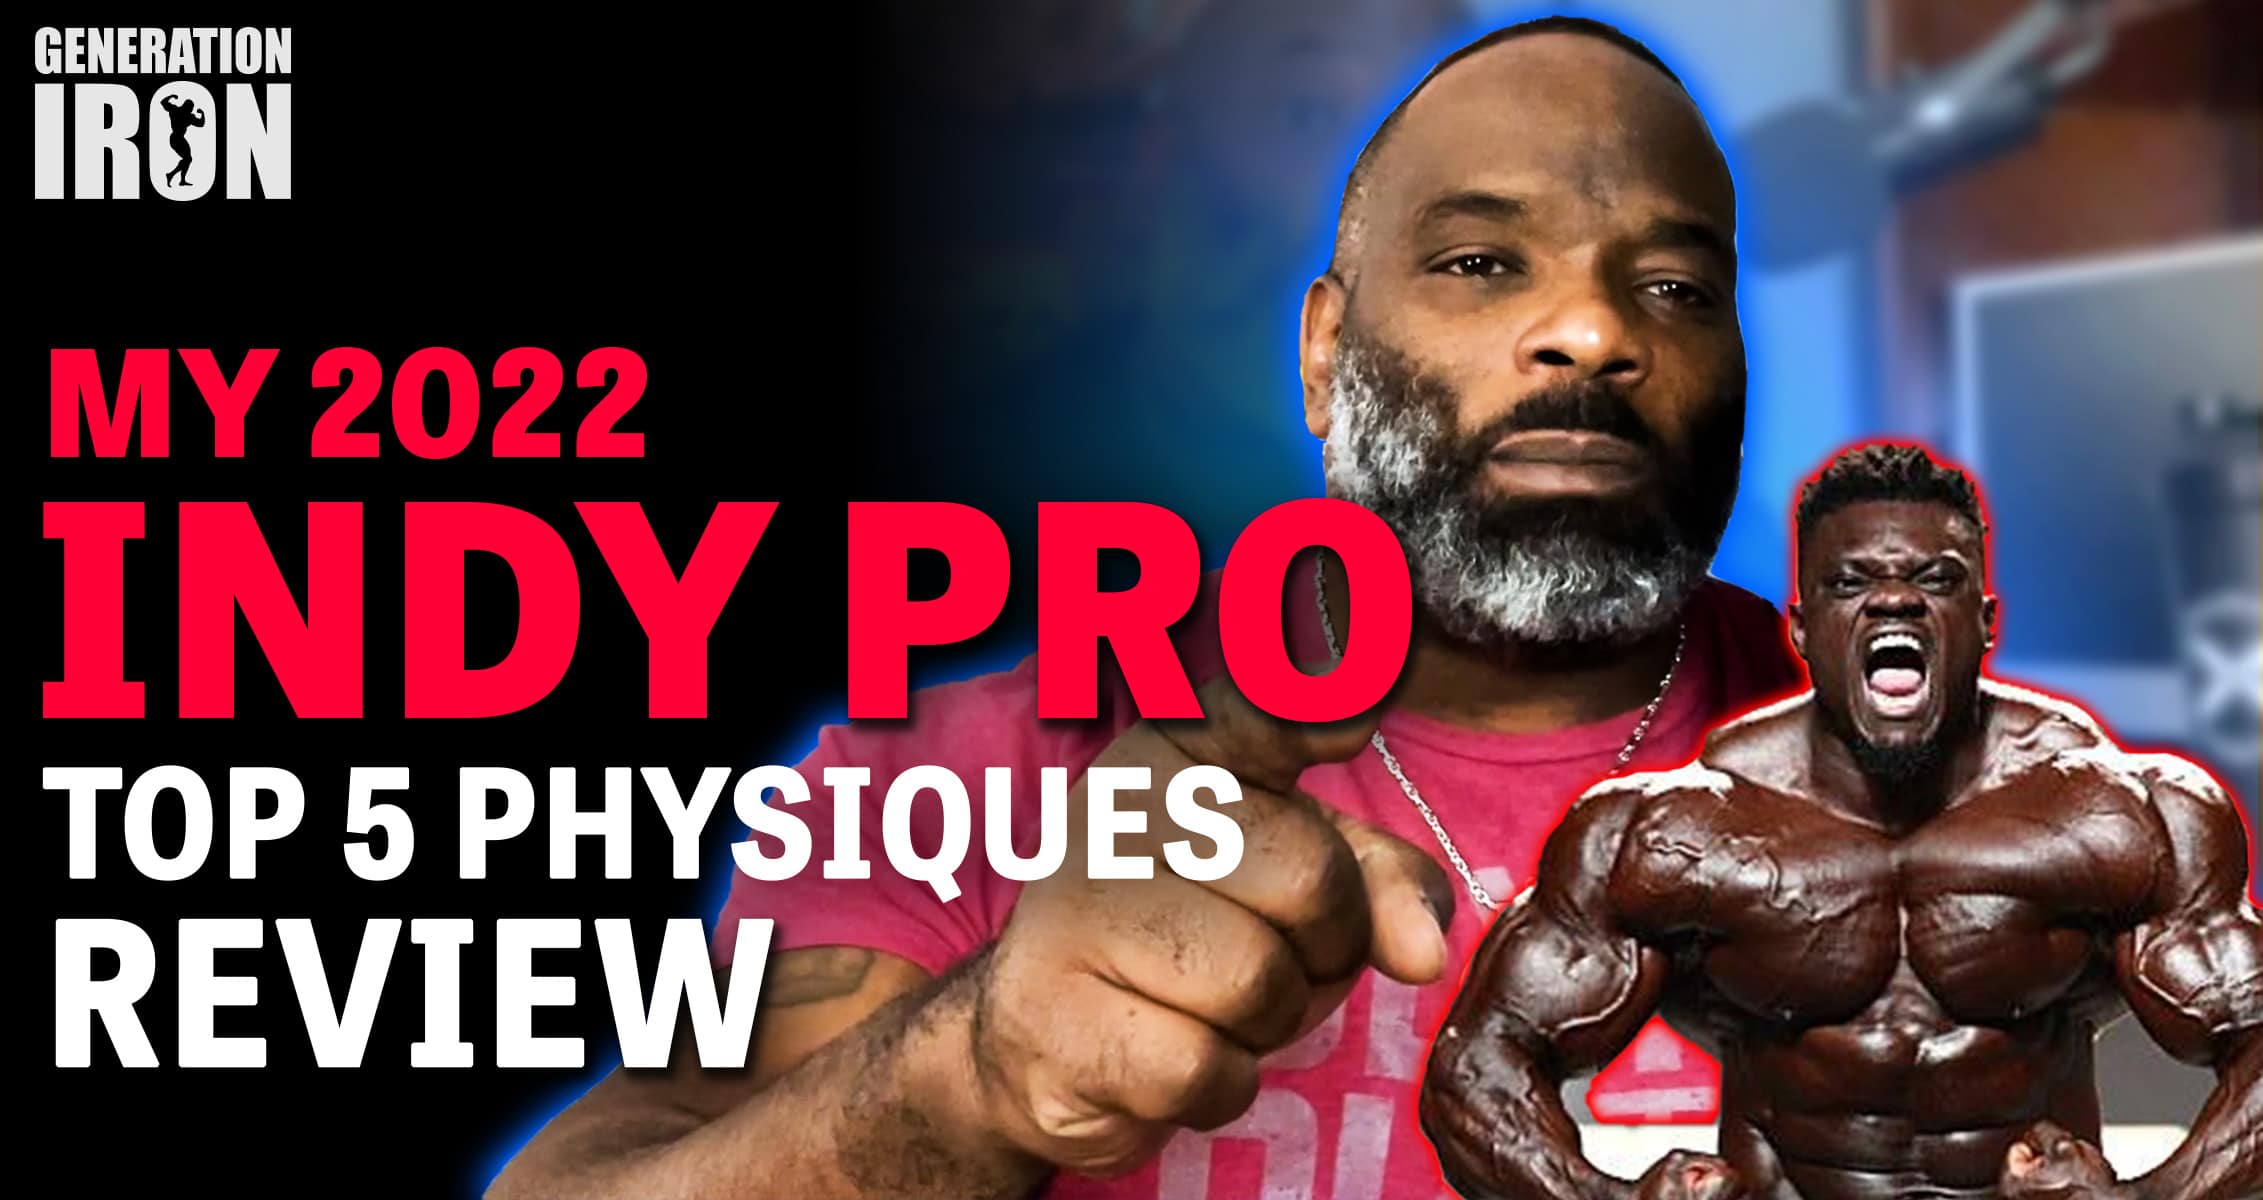 Hardcore Truth: Johnnie O. Jackson Reviews The 2022 Indy Pro Top 5 Physiques